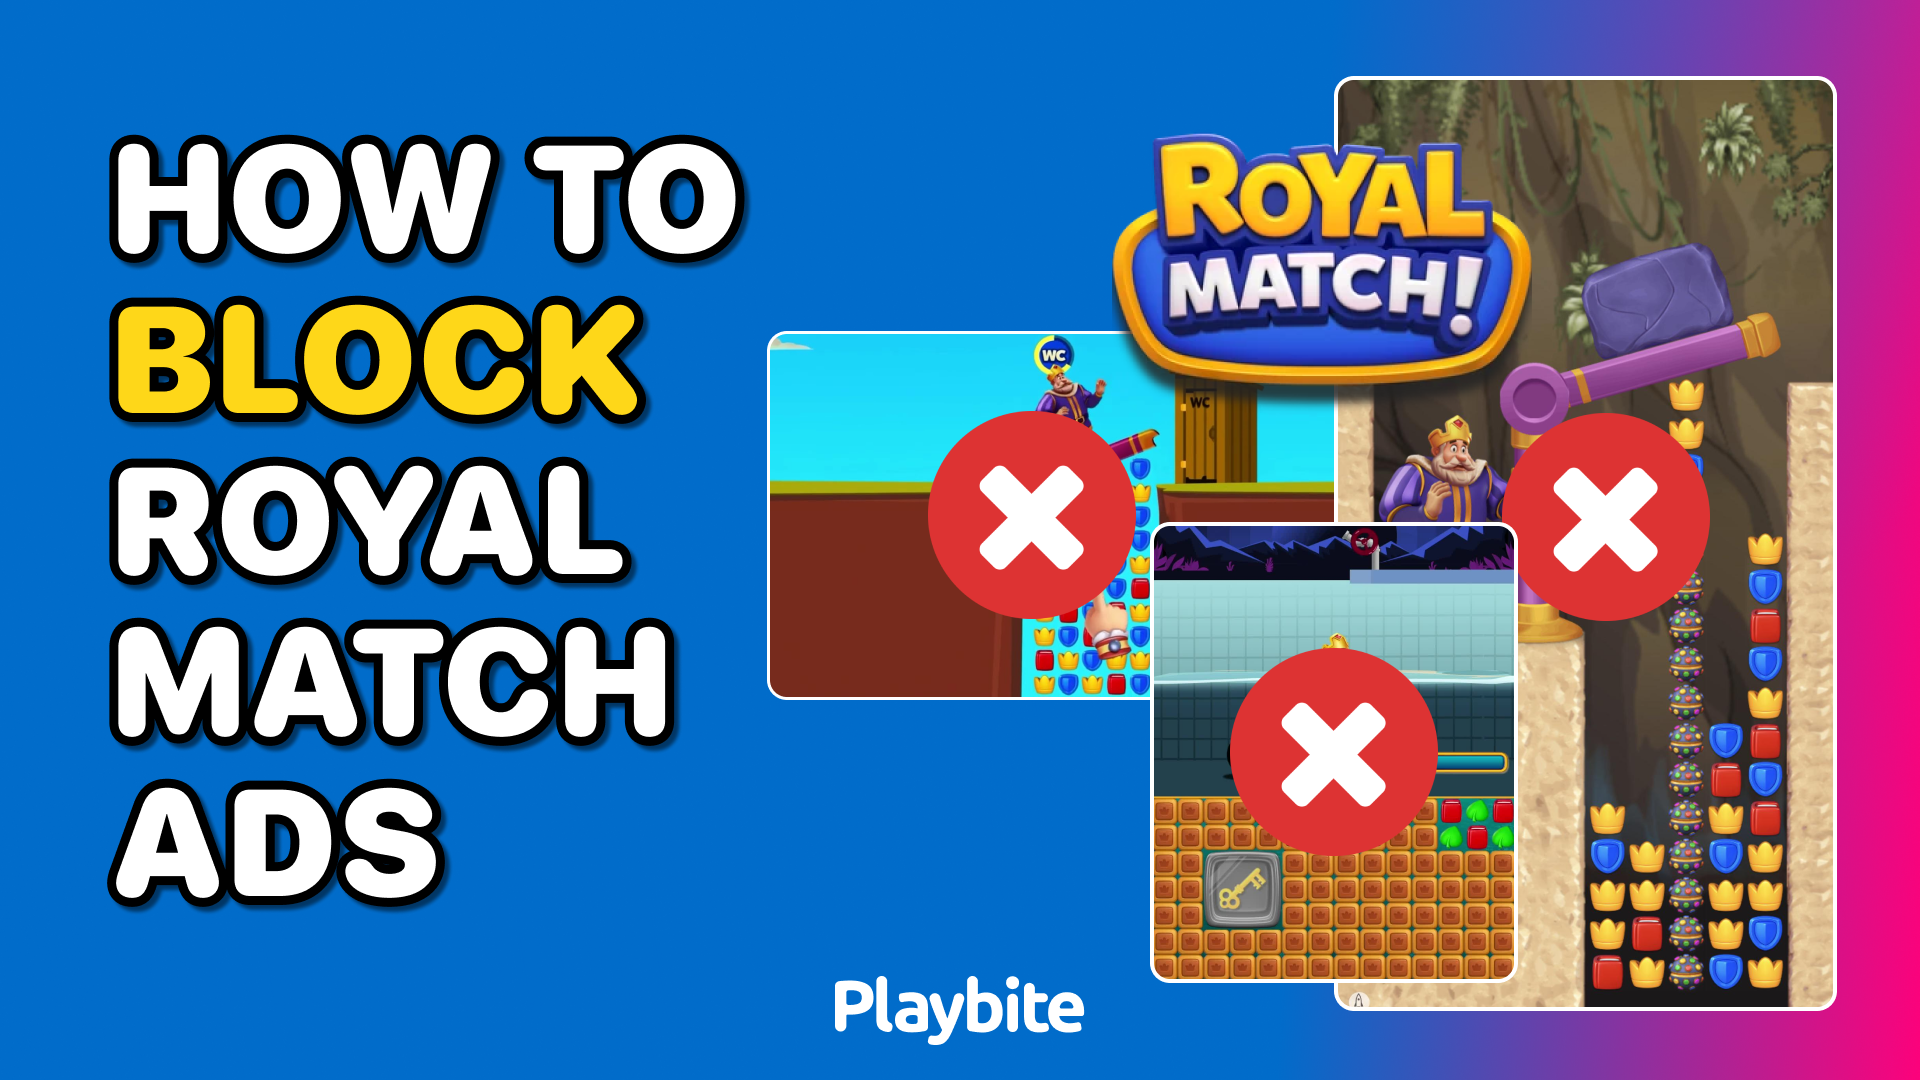 How To Block Royal Match Ads